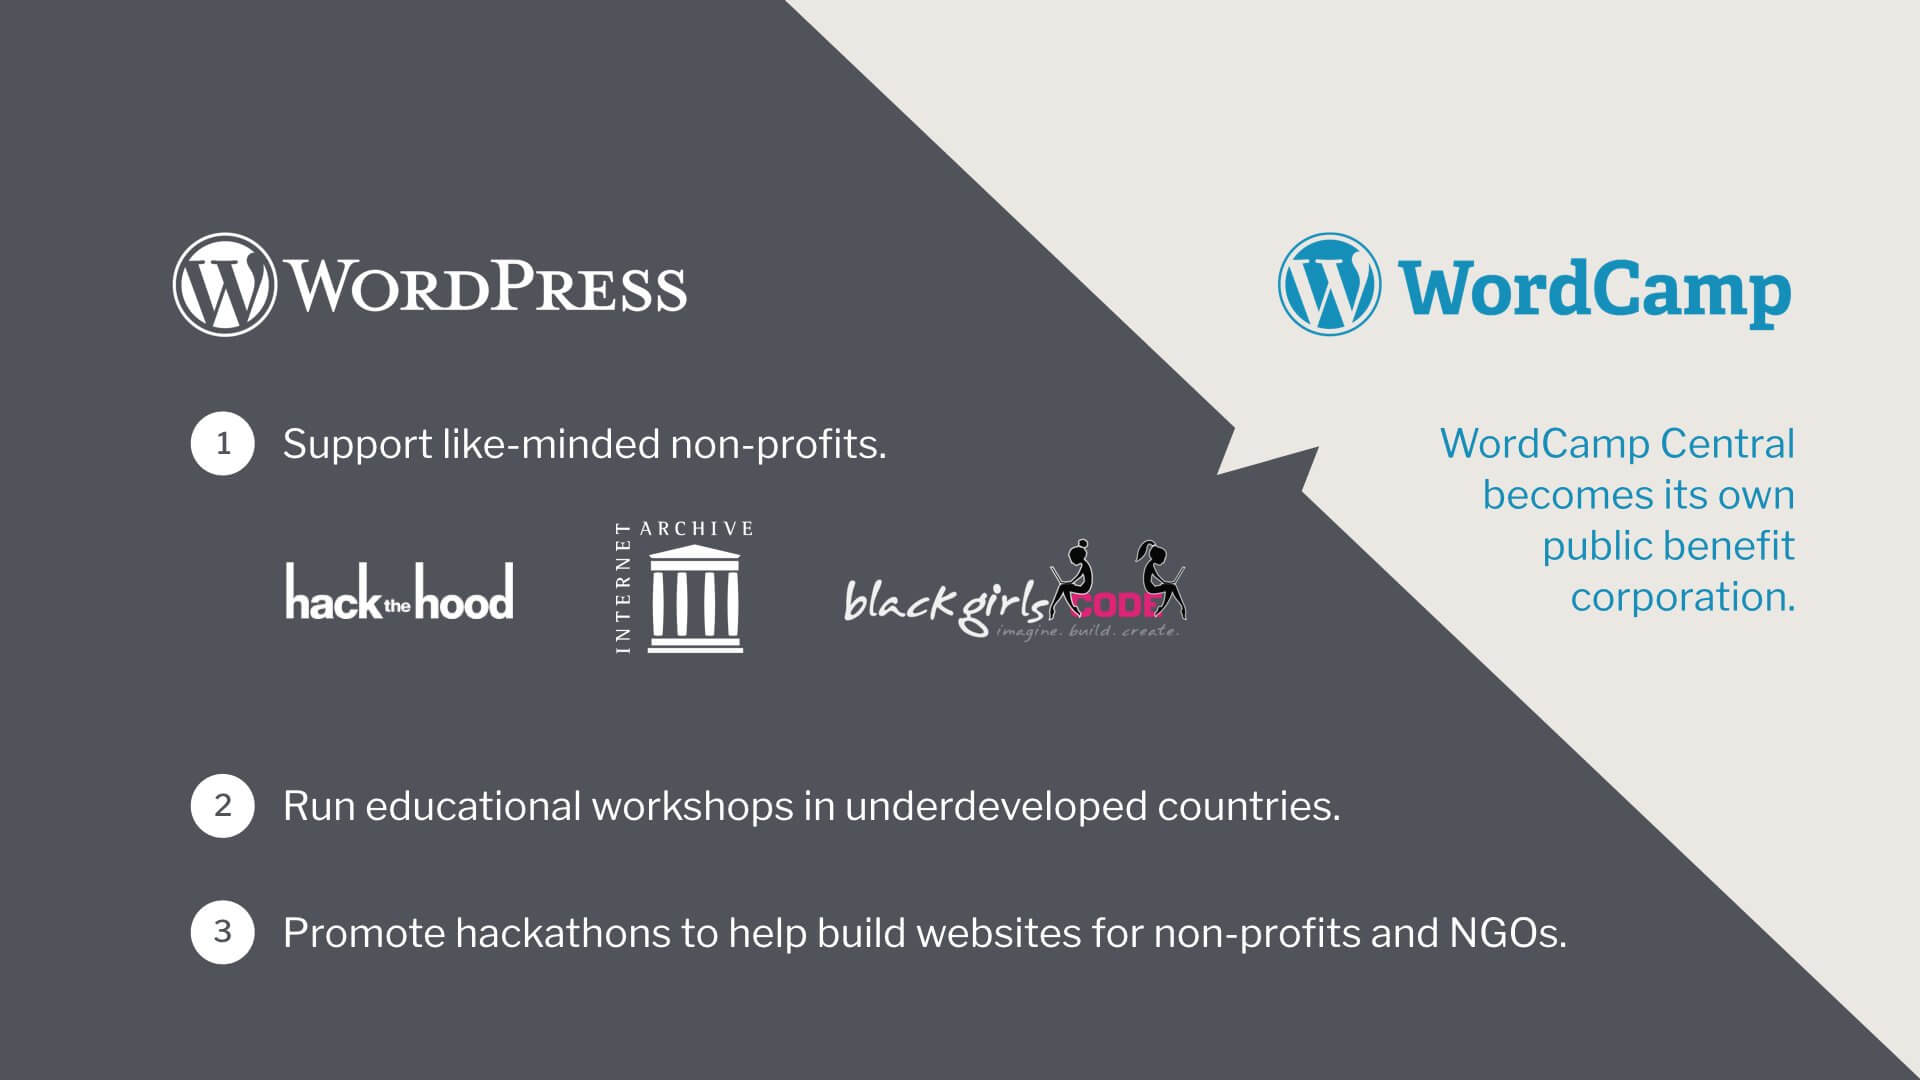 Automattic is transforming WordCamp into a public benefit corporation (PBC) to support like-minded non-profits.